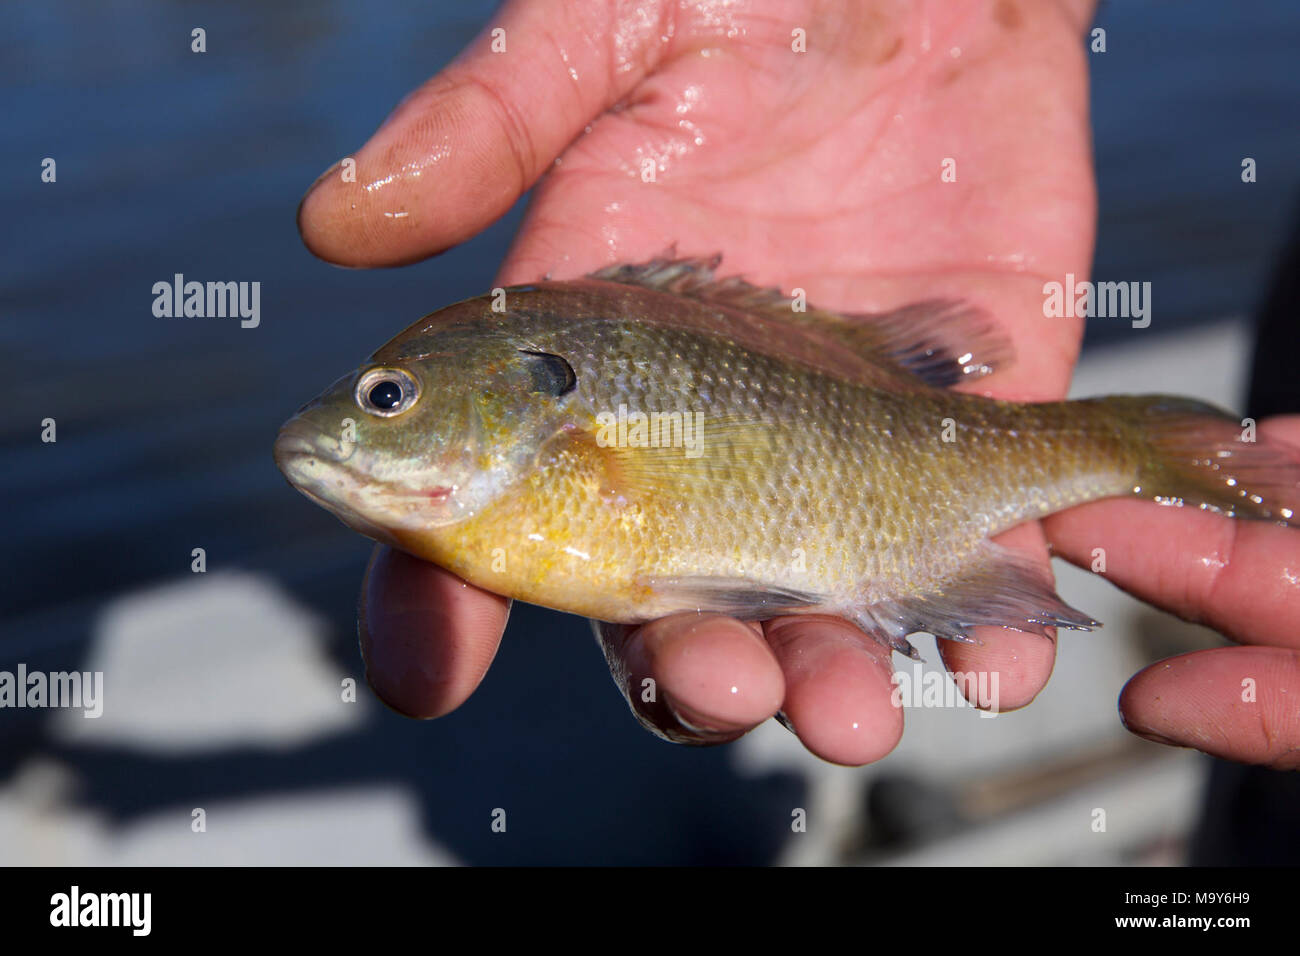 Bluegill. Bluegill captured and returned to the San Joaquin River near Tracy, California during U.S. Fish and Wildlife Service white sturgeon monitoring operations Nov. 28, 2017. Stock Photo